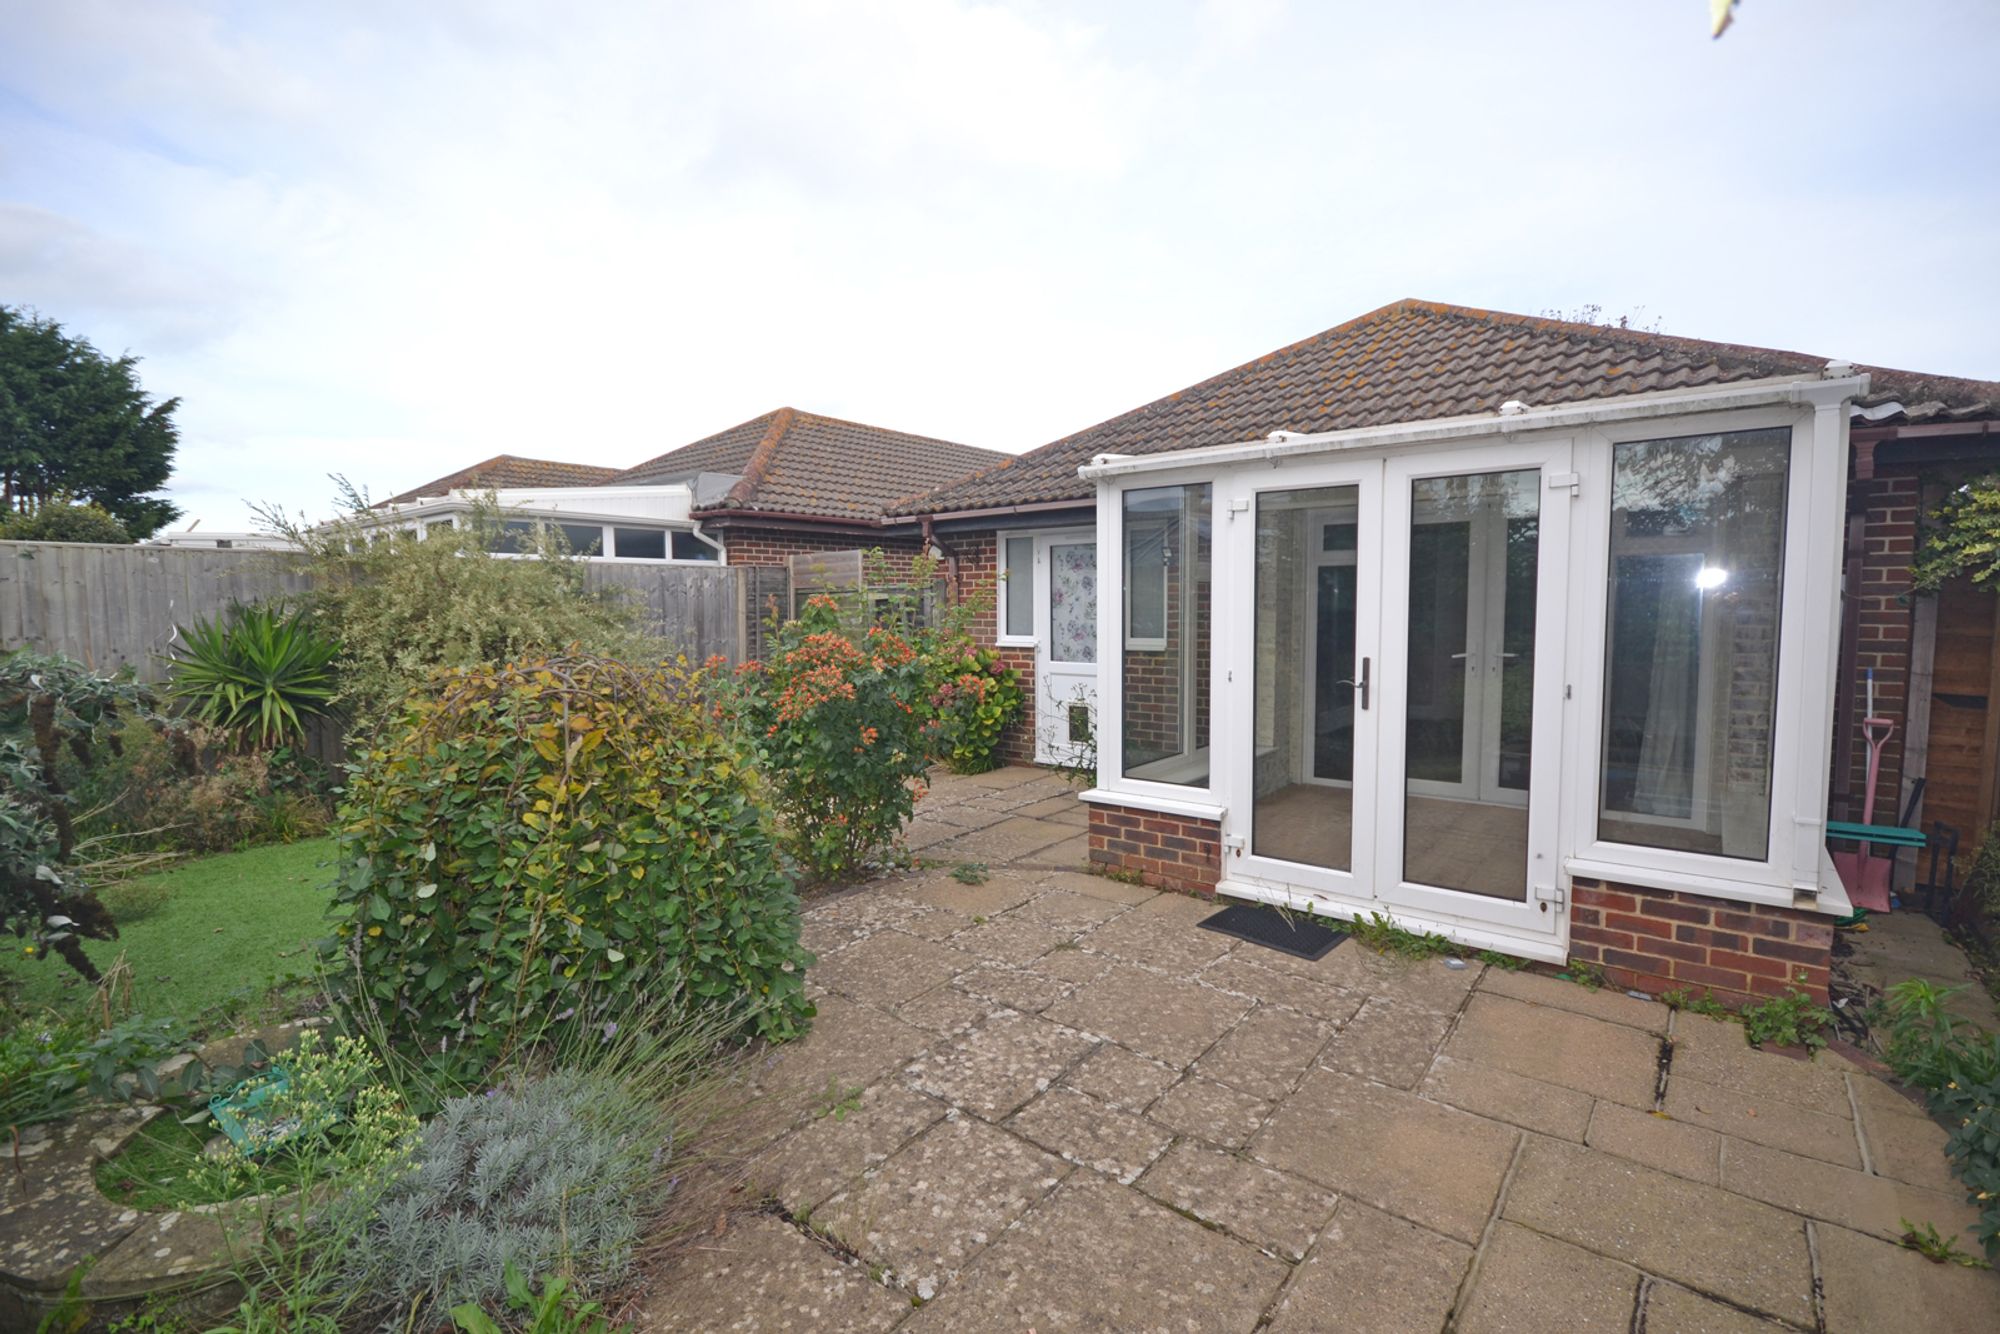 Chayle Gardens, Selsey, PO20